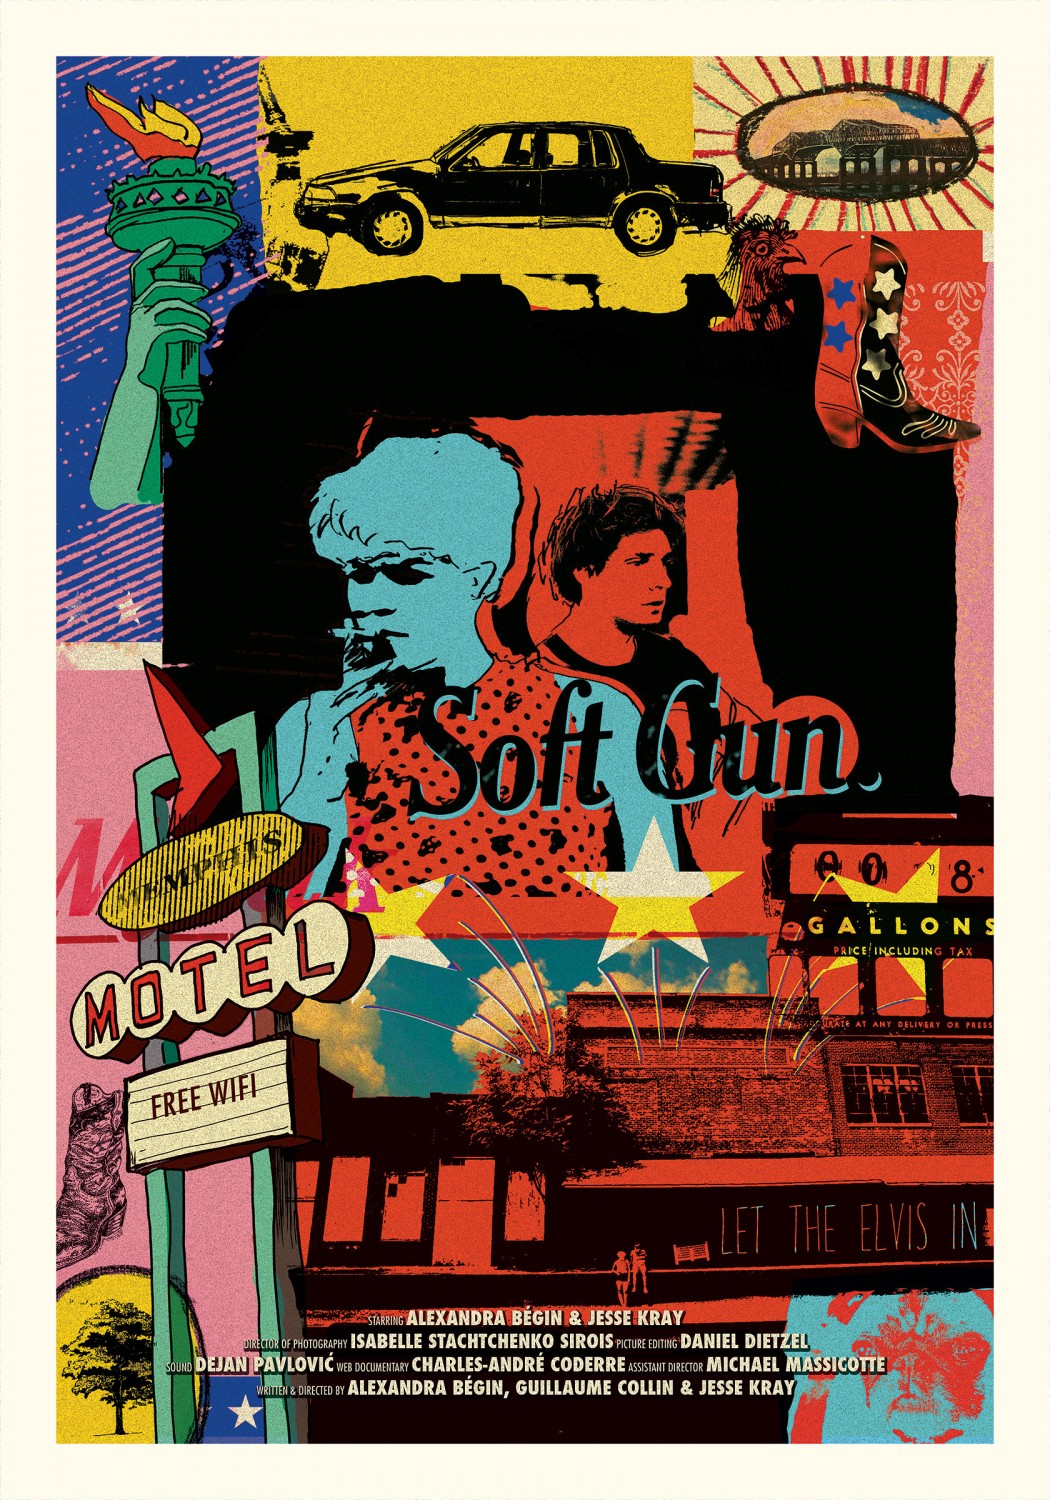 Extra Large Movie Poster Image for Soft Gun. 